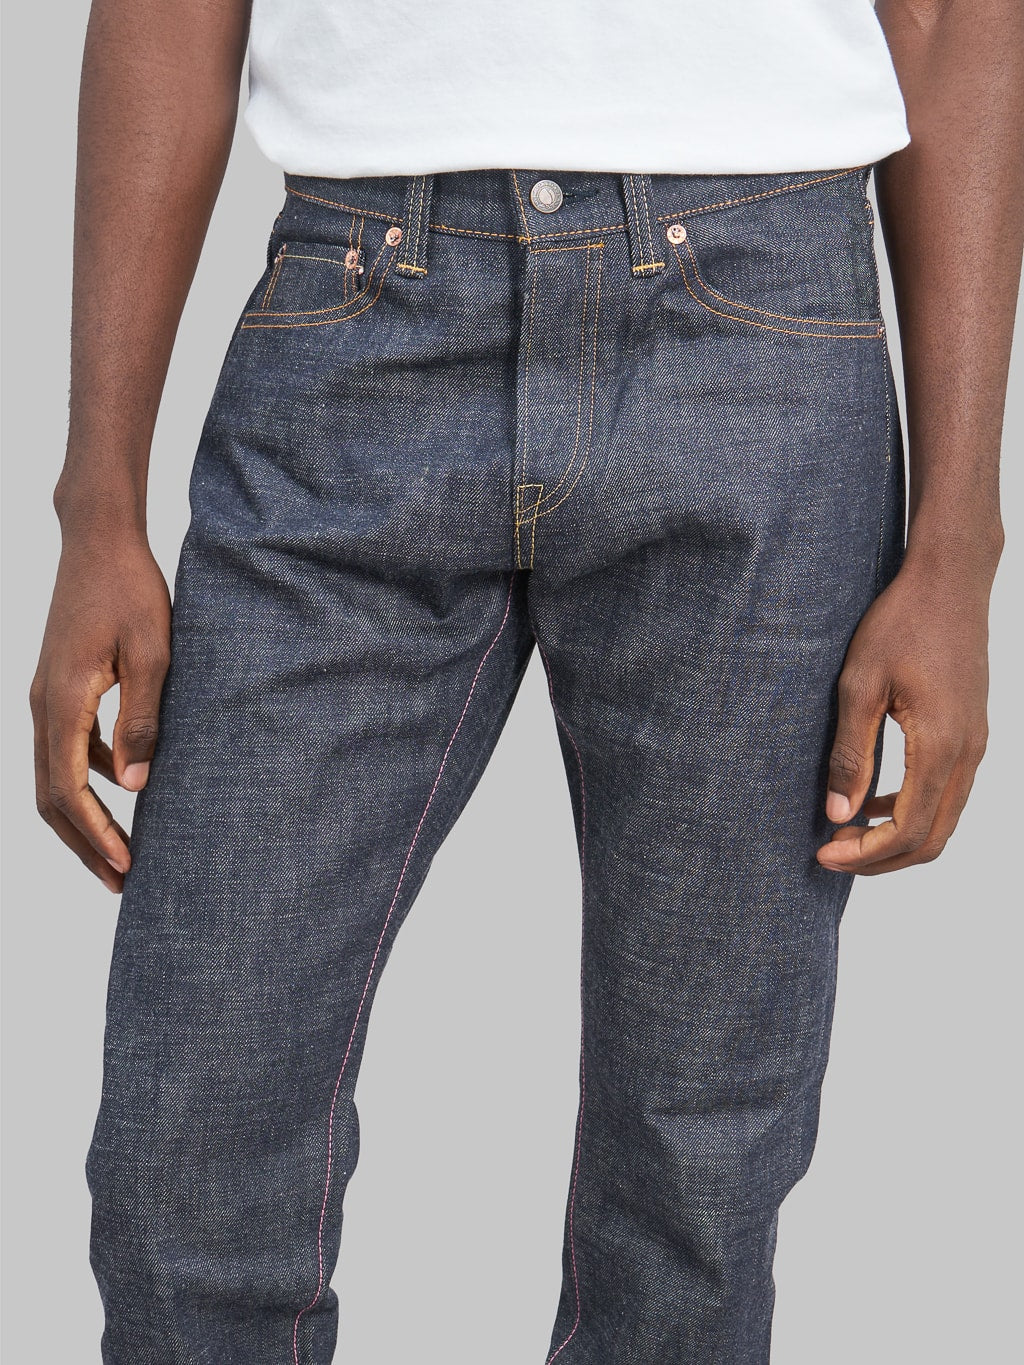 Momotaro legacy blue high tapered jeans front rise